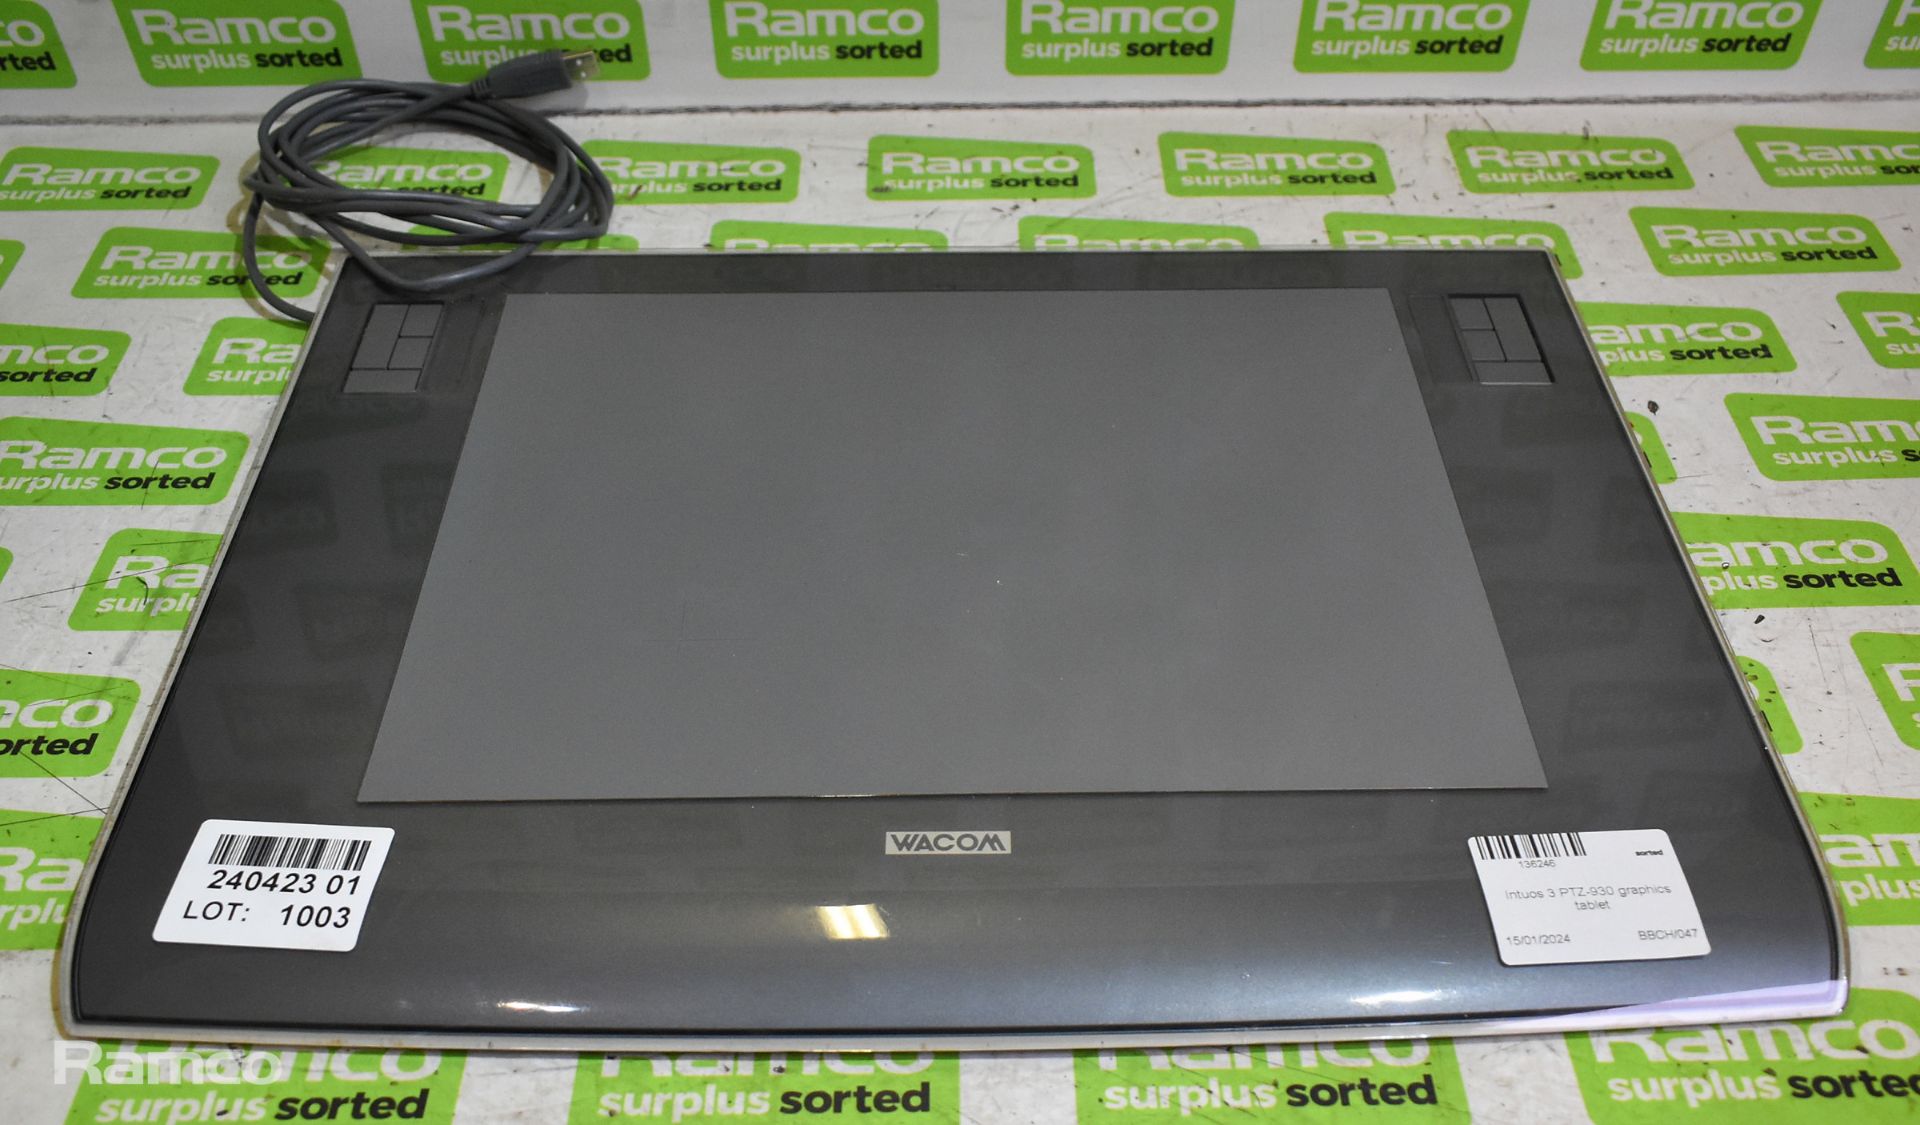 Intuos 3 PTZ-930 graphics tablet